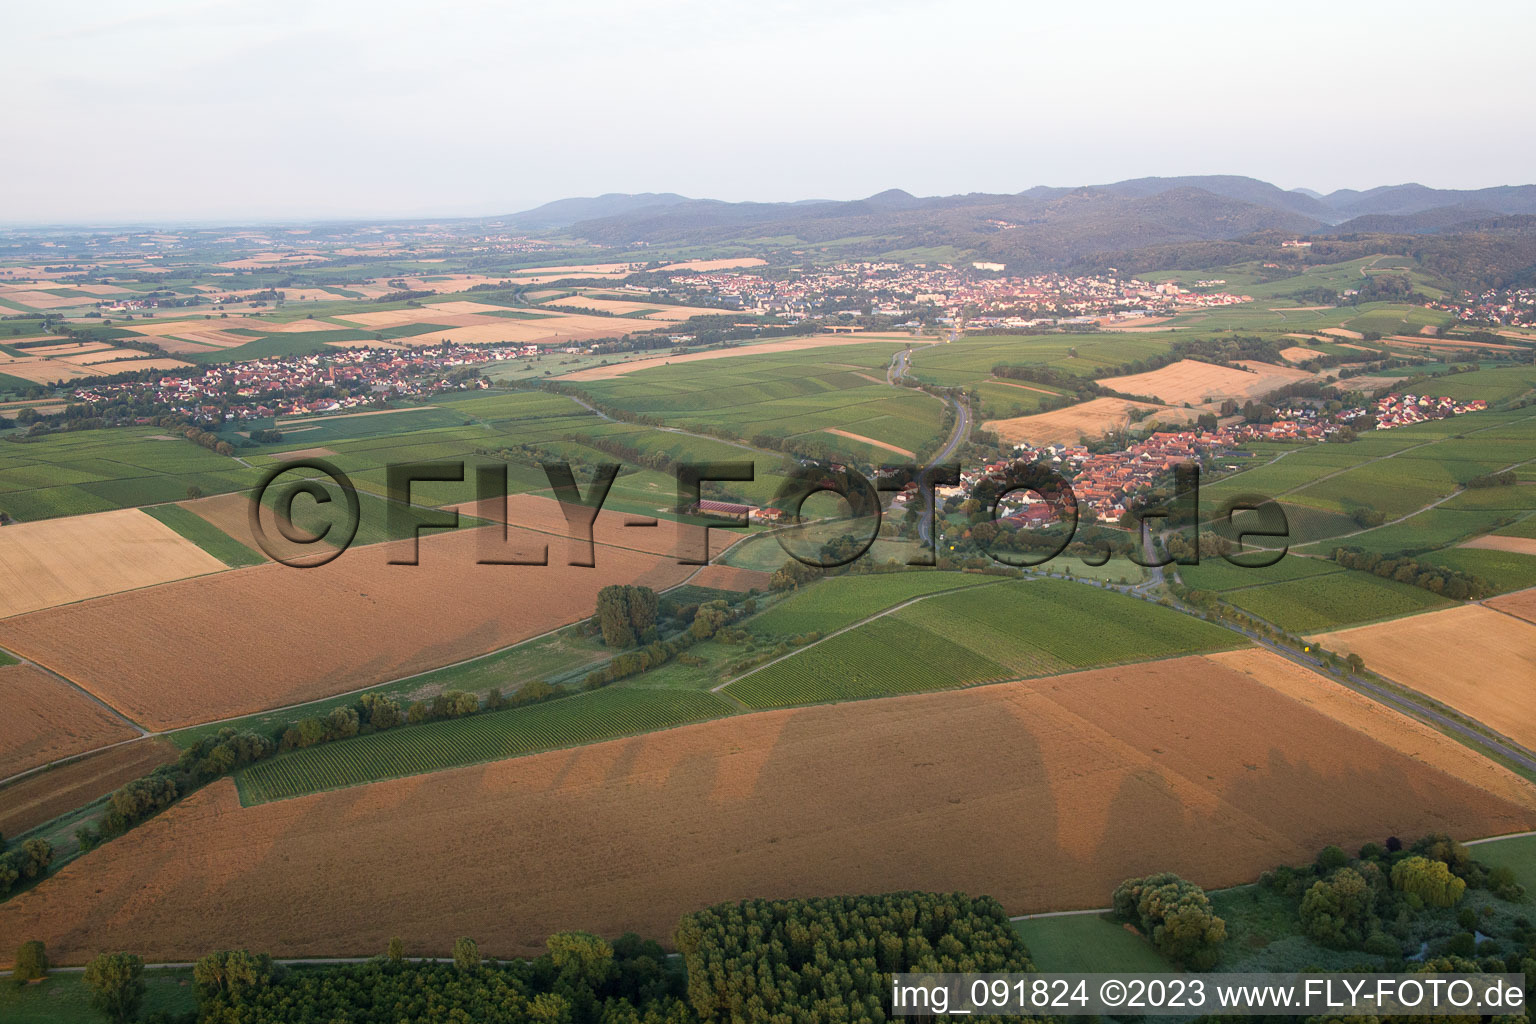 Drone recording of Niederhorbach in the state Rhineland-Palatinate, Germany